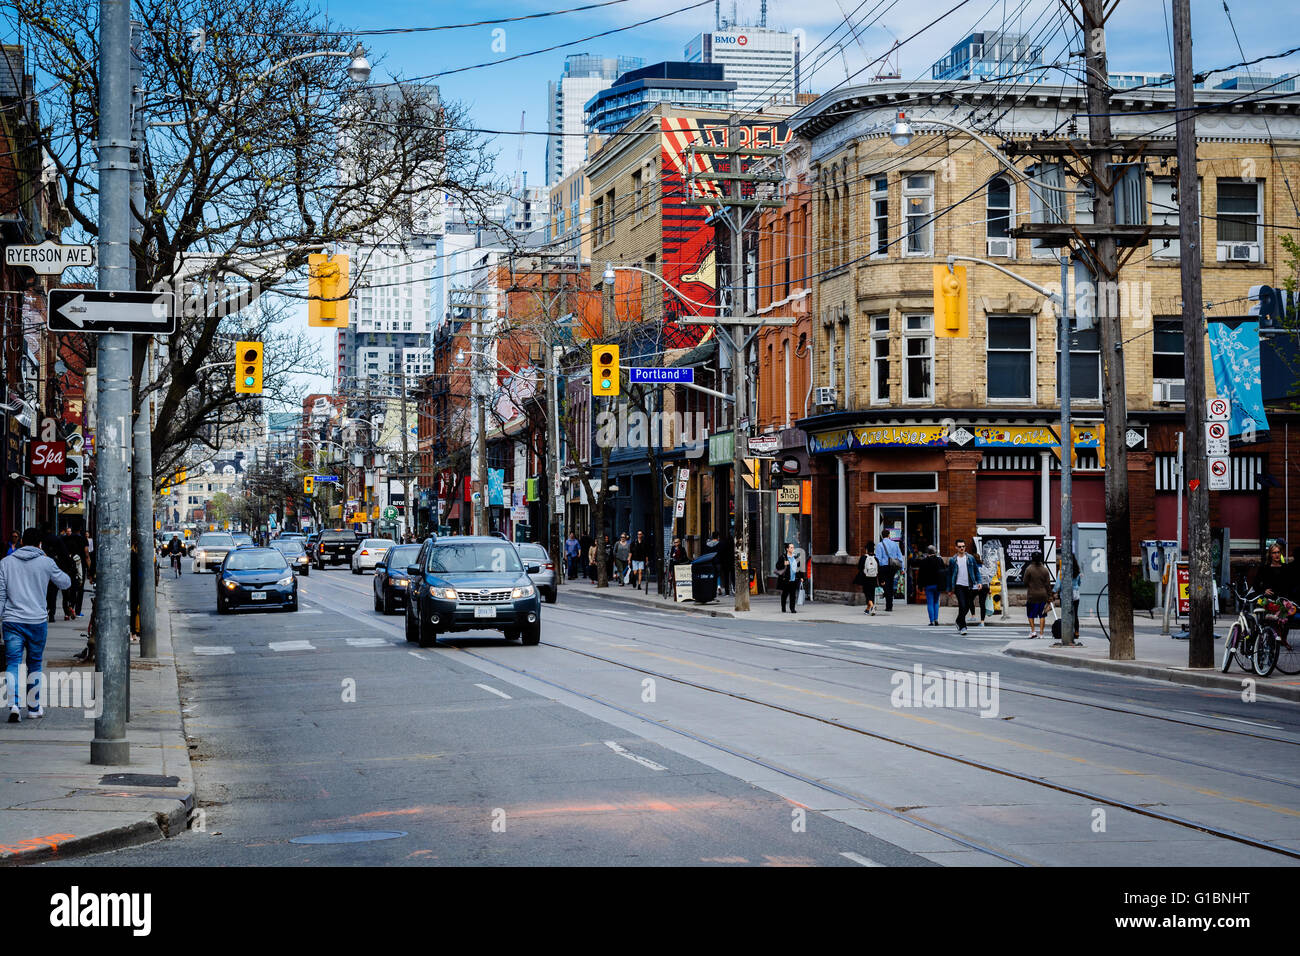 https://c8.alamy.com/comp/G1BNHT/queen-street-west-in-the-fashion-district-of-toronto-ontario-G1BNHT.jpg